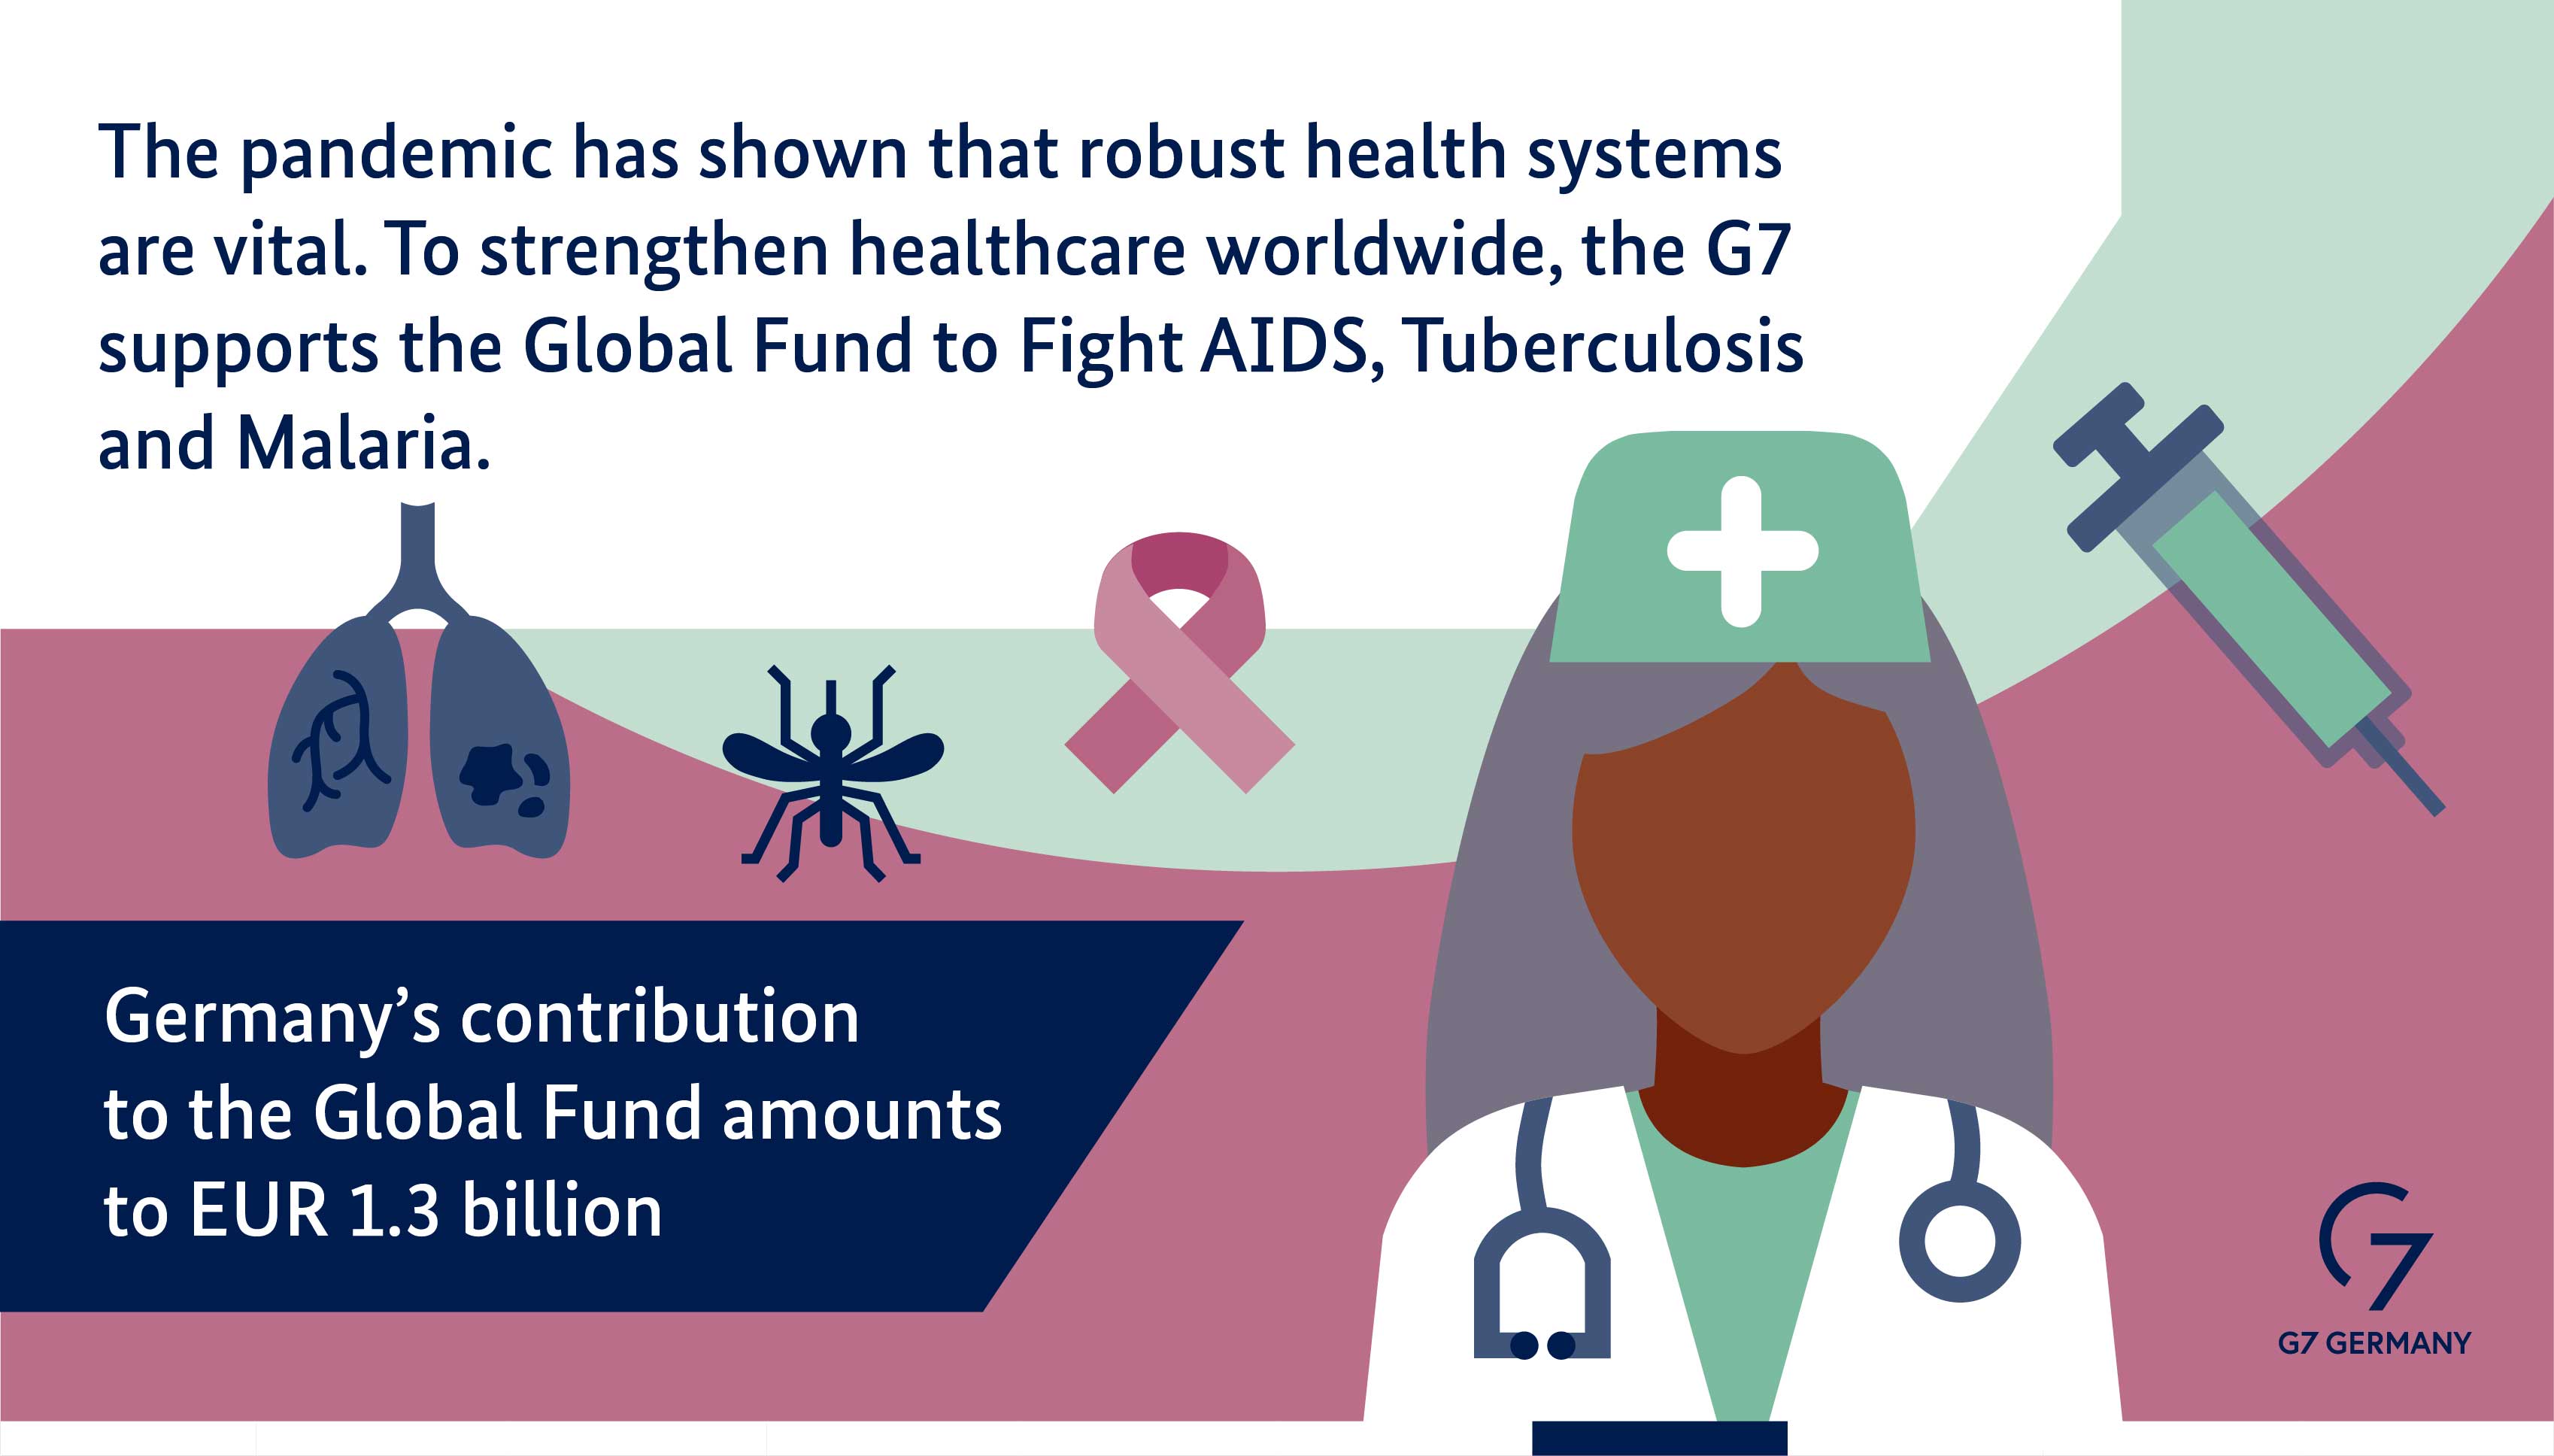 The pandemic has shown that strong health systems are vital. To strengthen health worldwide, the G7 supports the Global Fund to Fight AIDS, Tuberculosis and Malaria. Germany's contribution to this: 1.2 billion euros